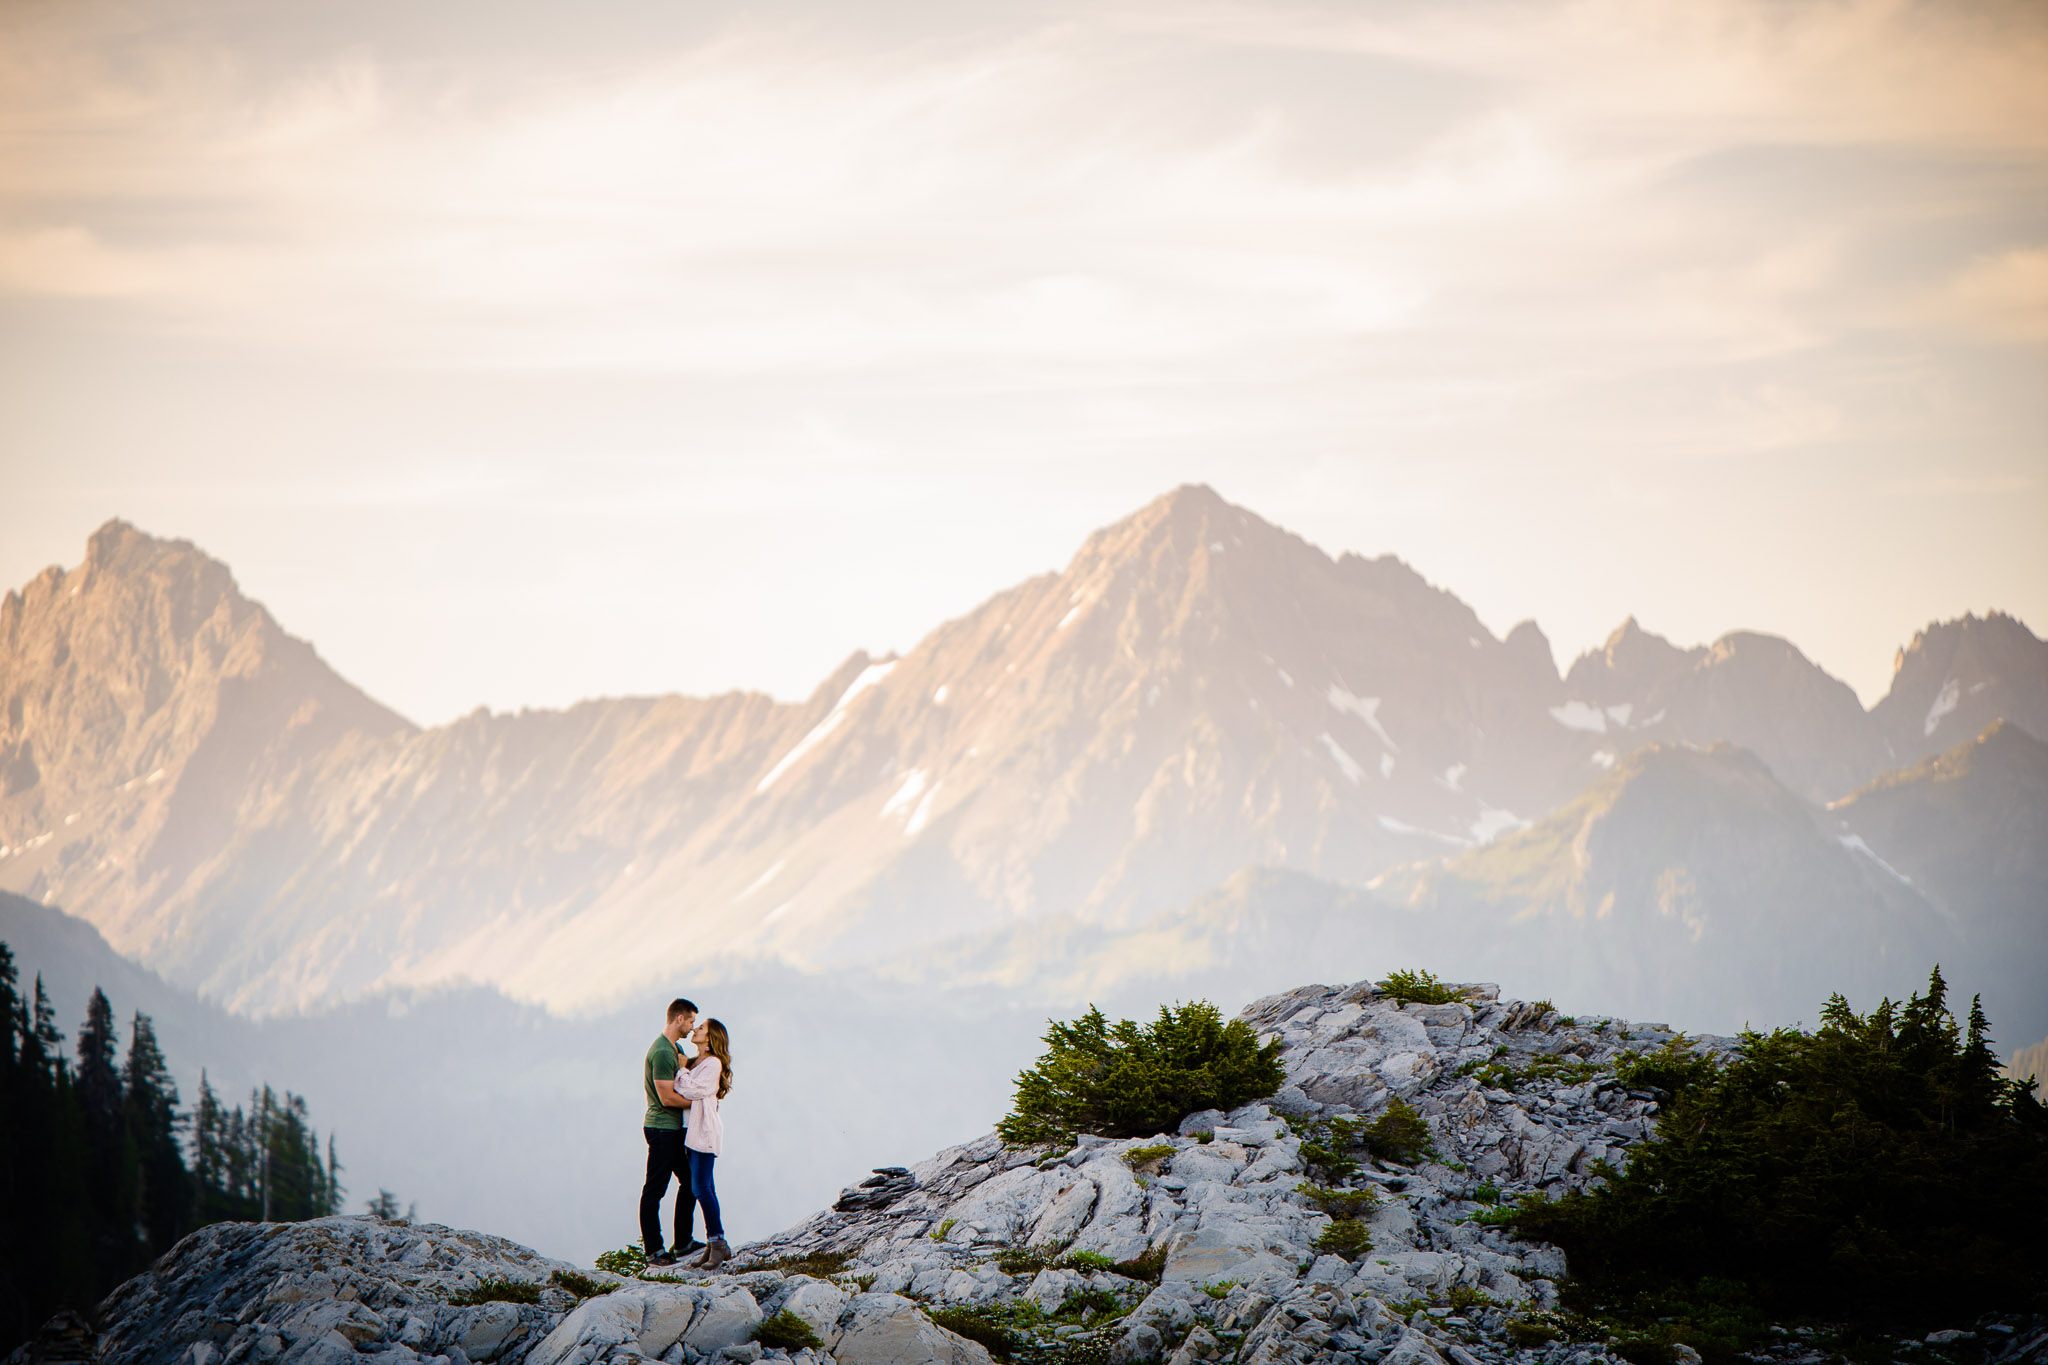 A couple holding each other for a pose on top of a cliff with mountain peaks in the background